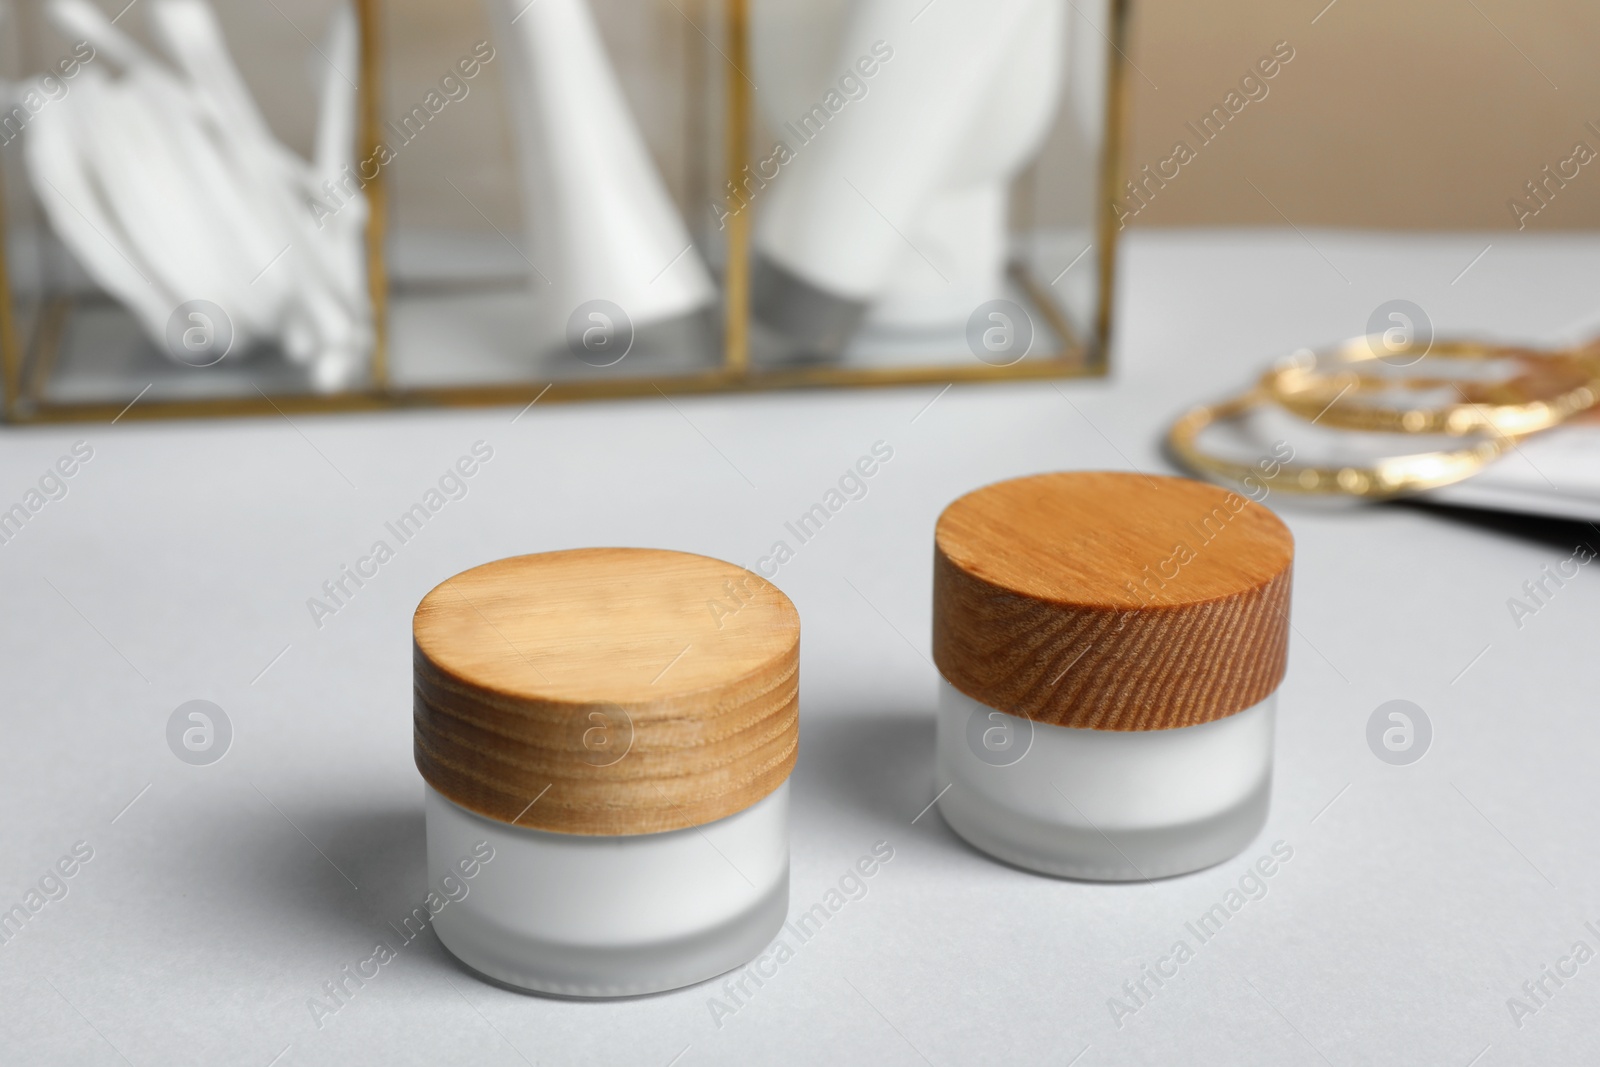 Photo of Closed jars of cream on white table